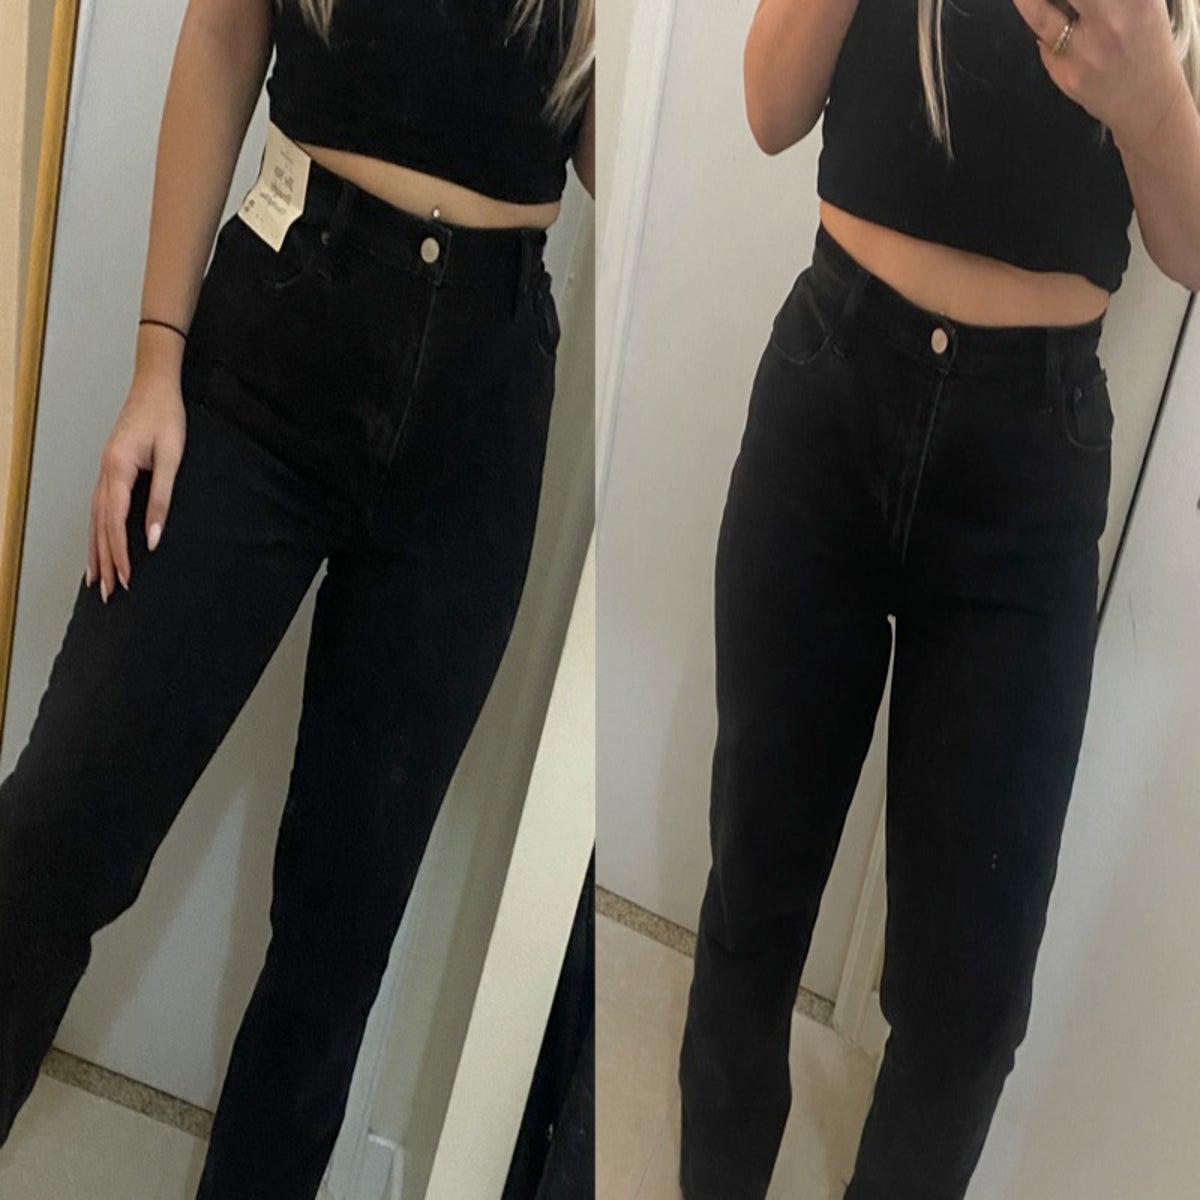 Woman tries to button jeans, too tight, too small, too tight